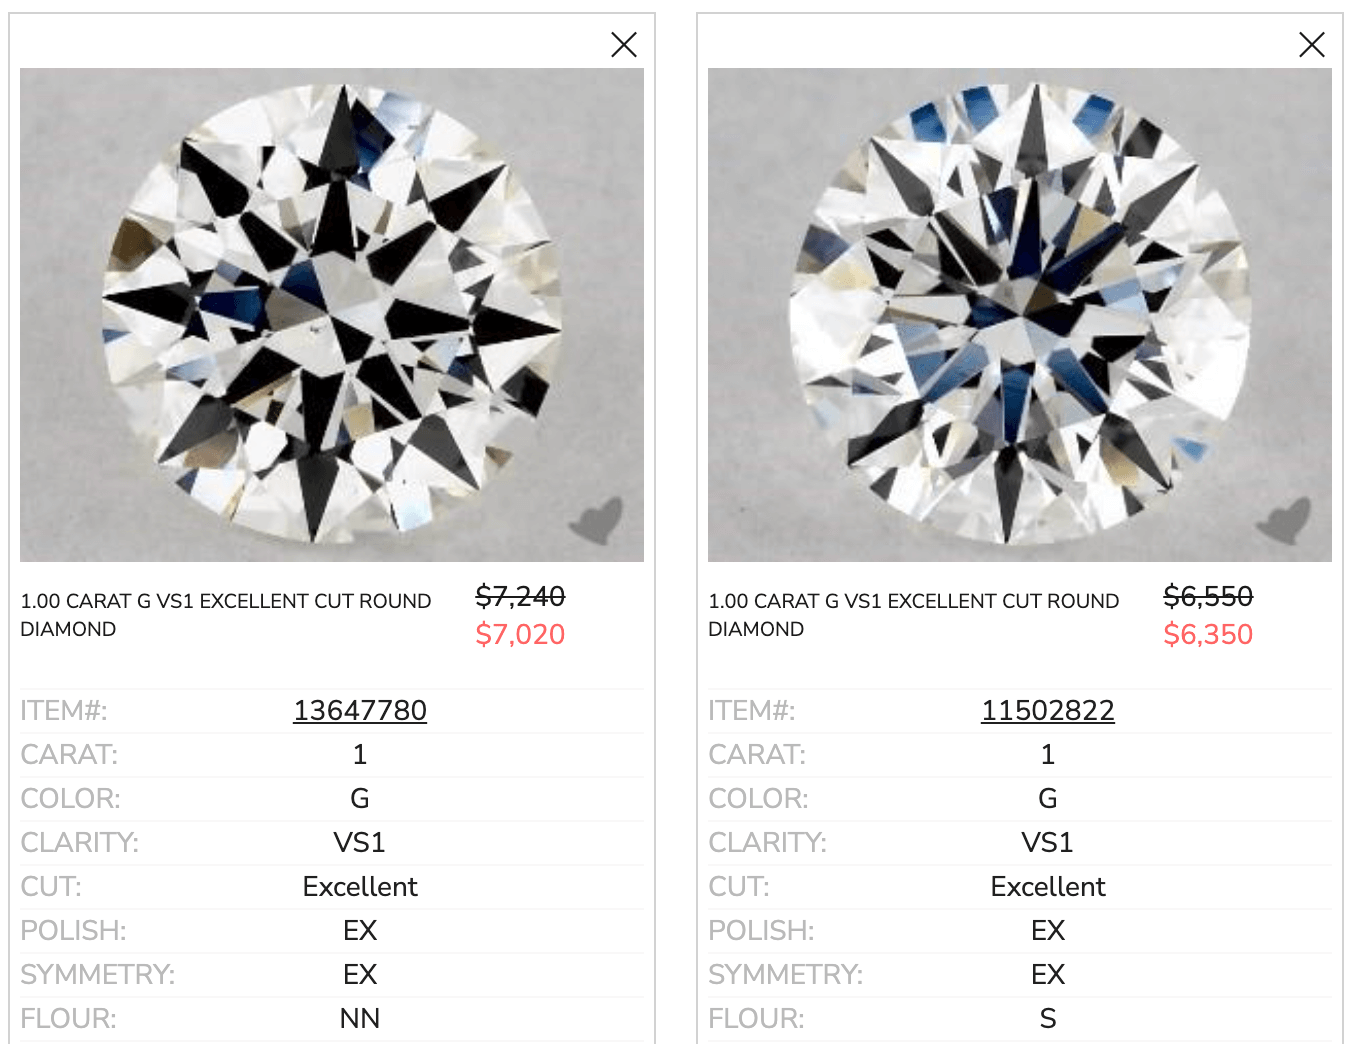 Two similar diamonds with different prices